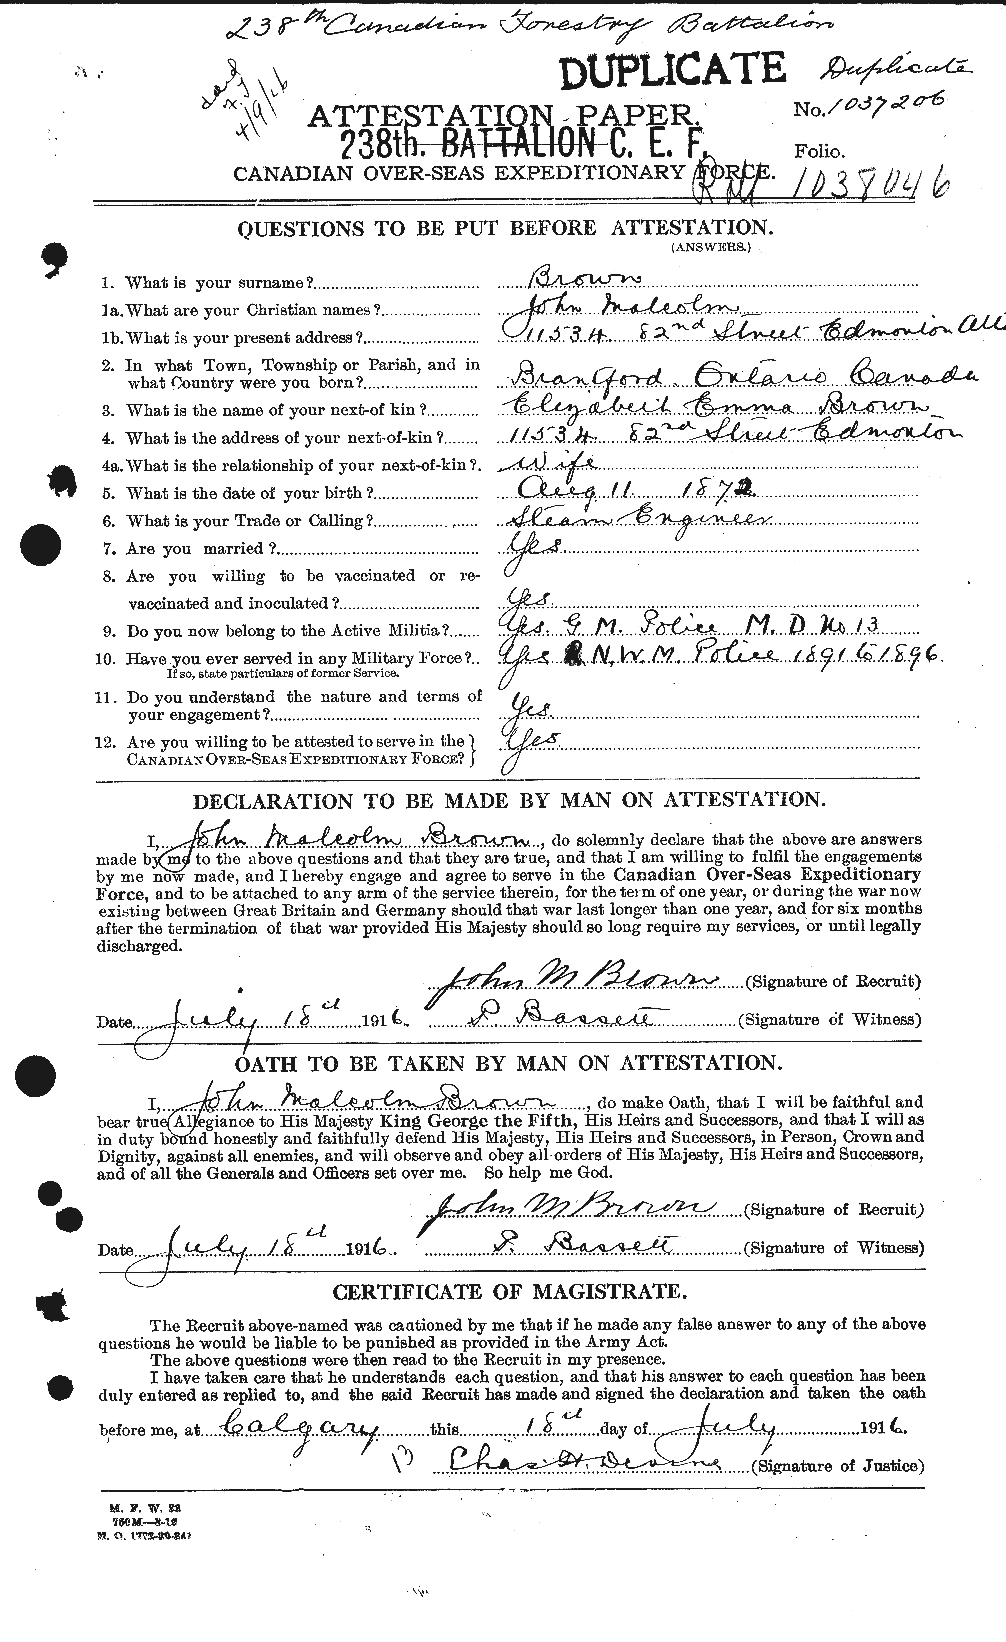 Personnel Records of the First World War - CEF 265833a